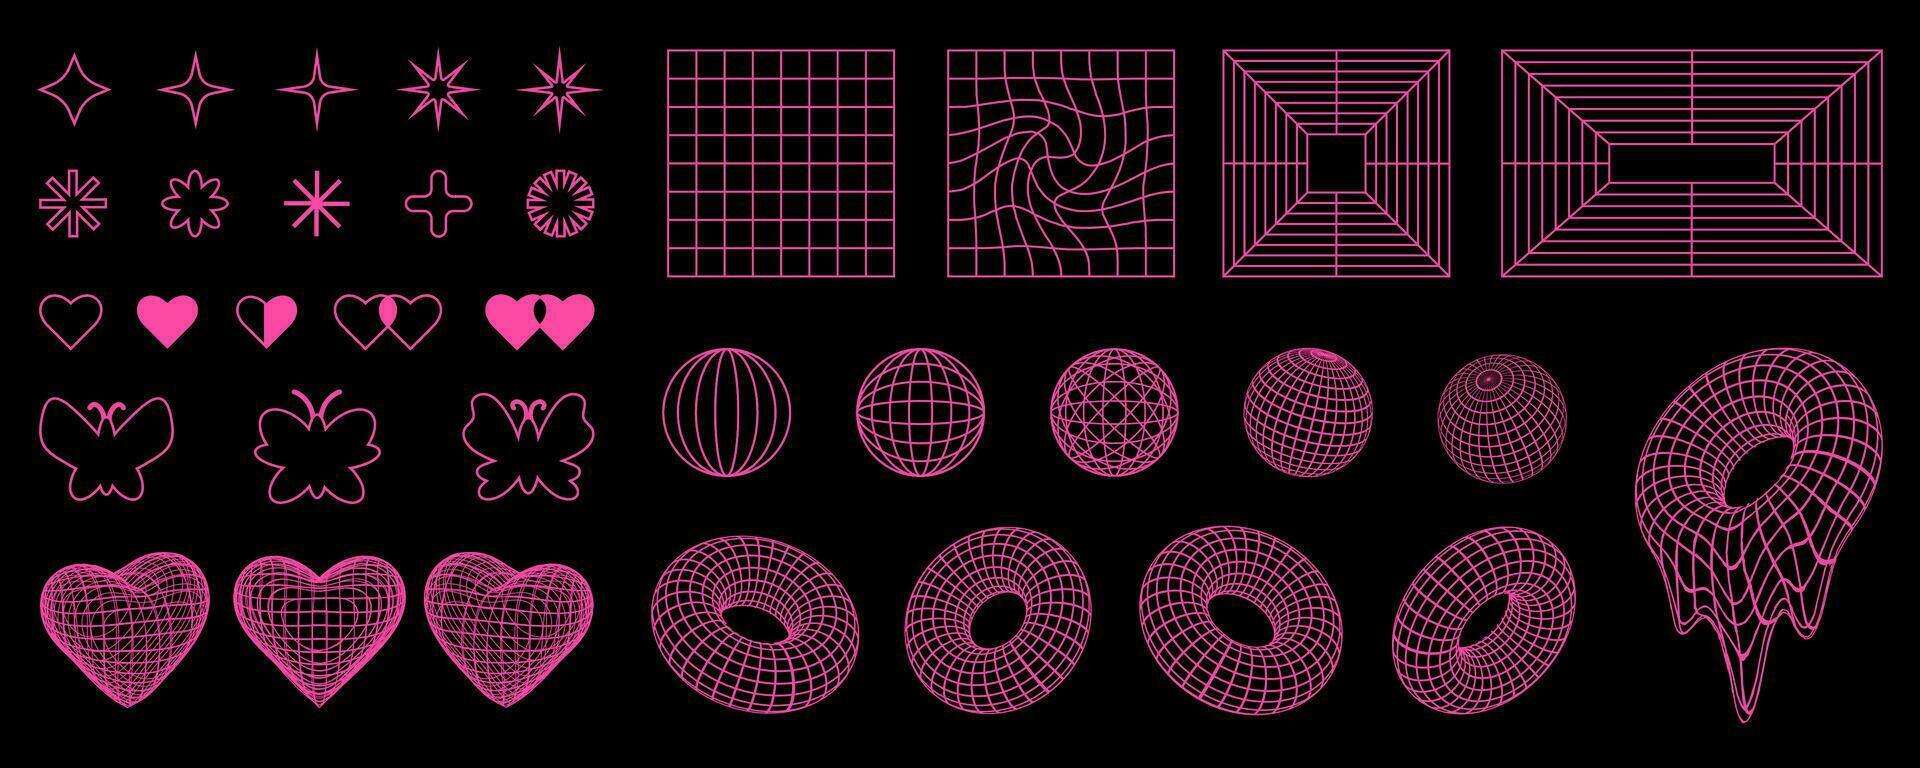 Retro Y2K shapes and 3d wireframes, grids, geometric forms, pink neon crazy design elements in 2000s aesthetic style. vector